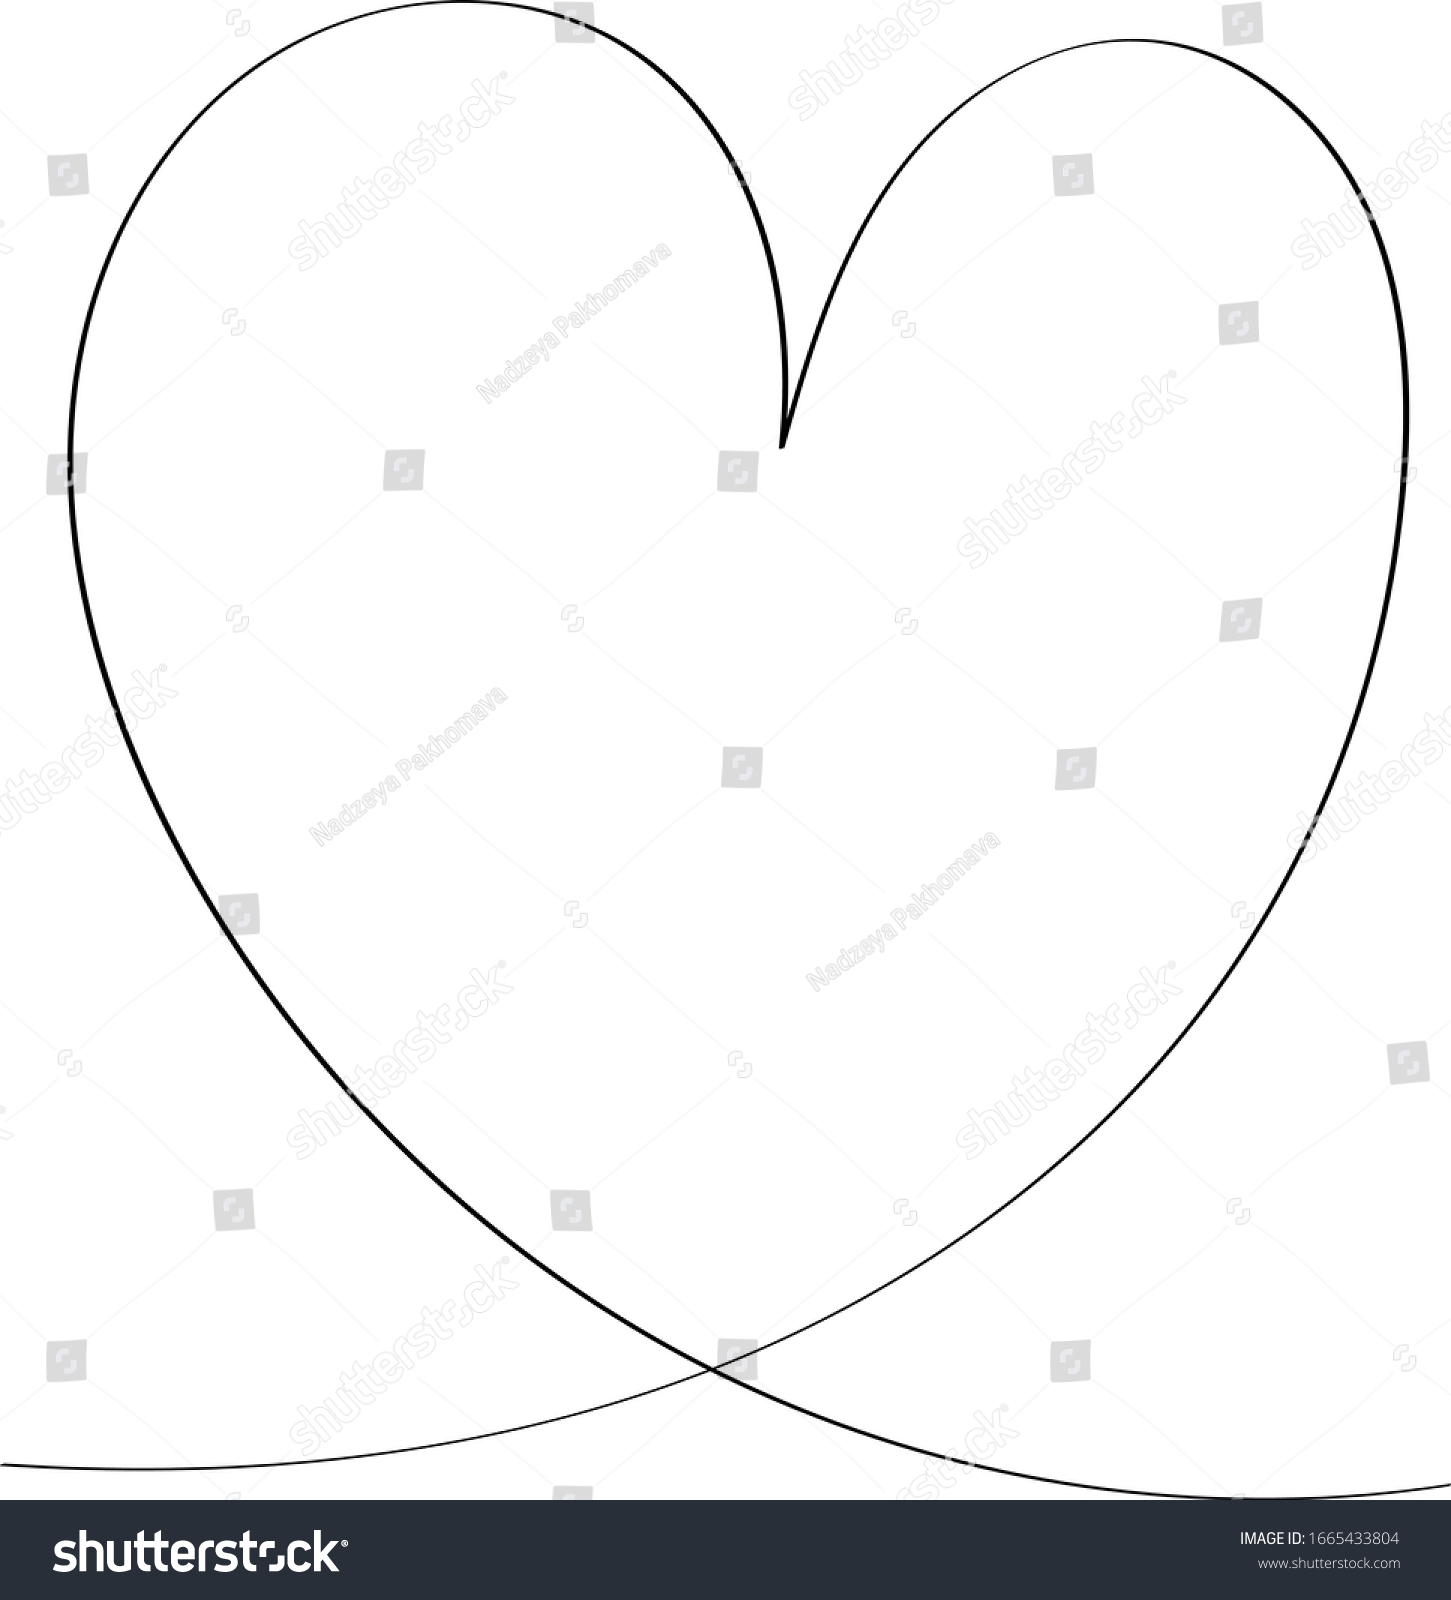 Heart contour in black, illustration for creating a screensaver template. Valentine's Day greeting card for lovers. #1665433804